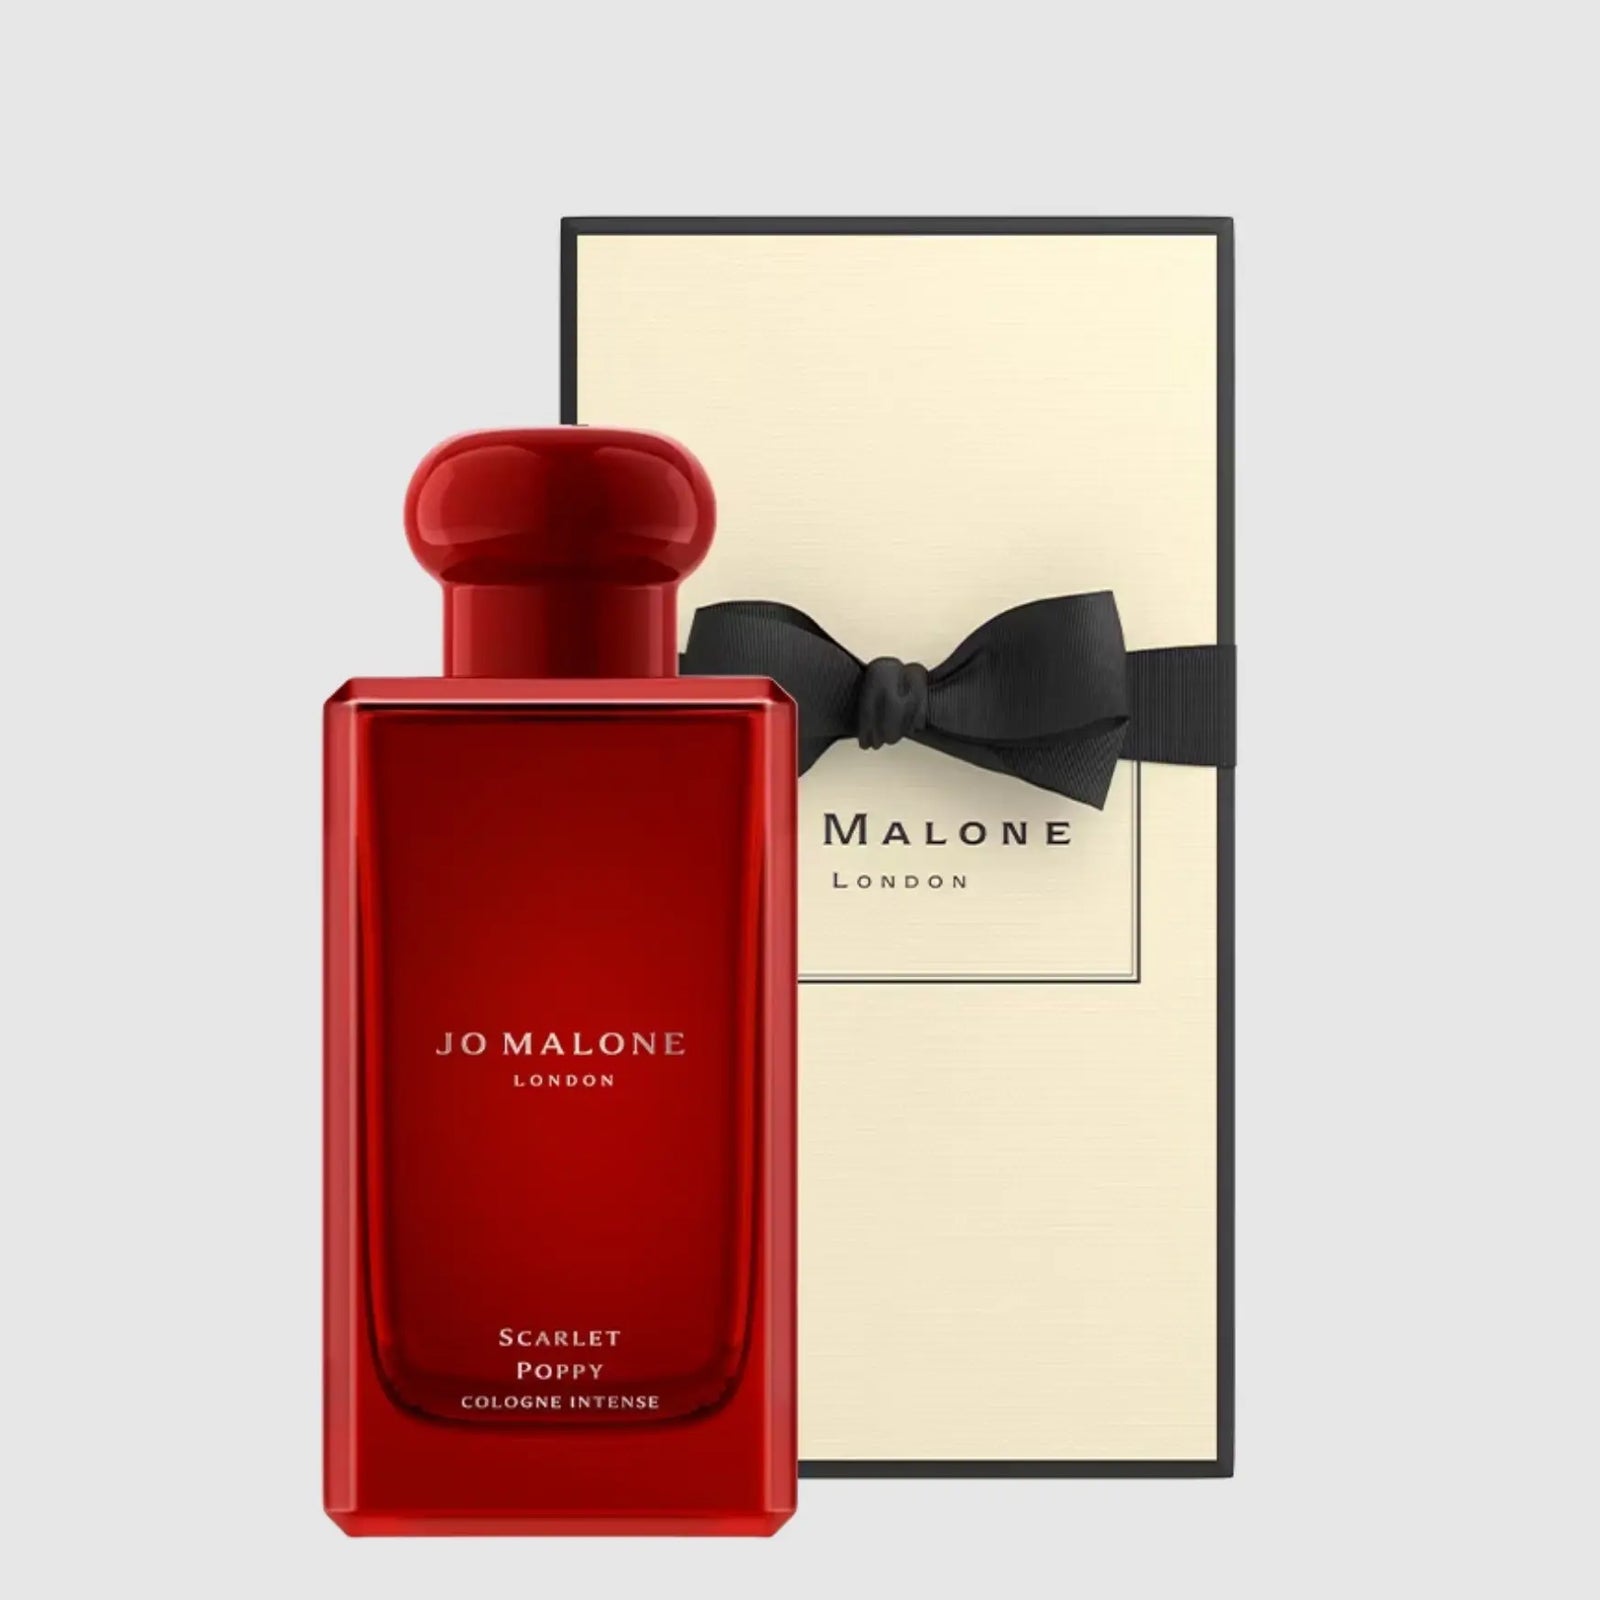 Jo Malone Scarlet Poppy Cologne Unisex 100ml Imported Perfumes & Beauty Store